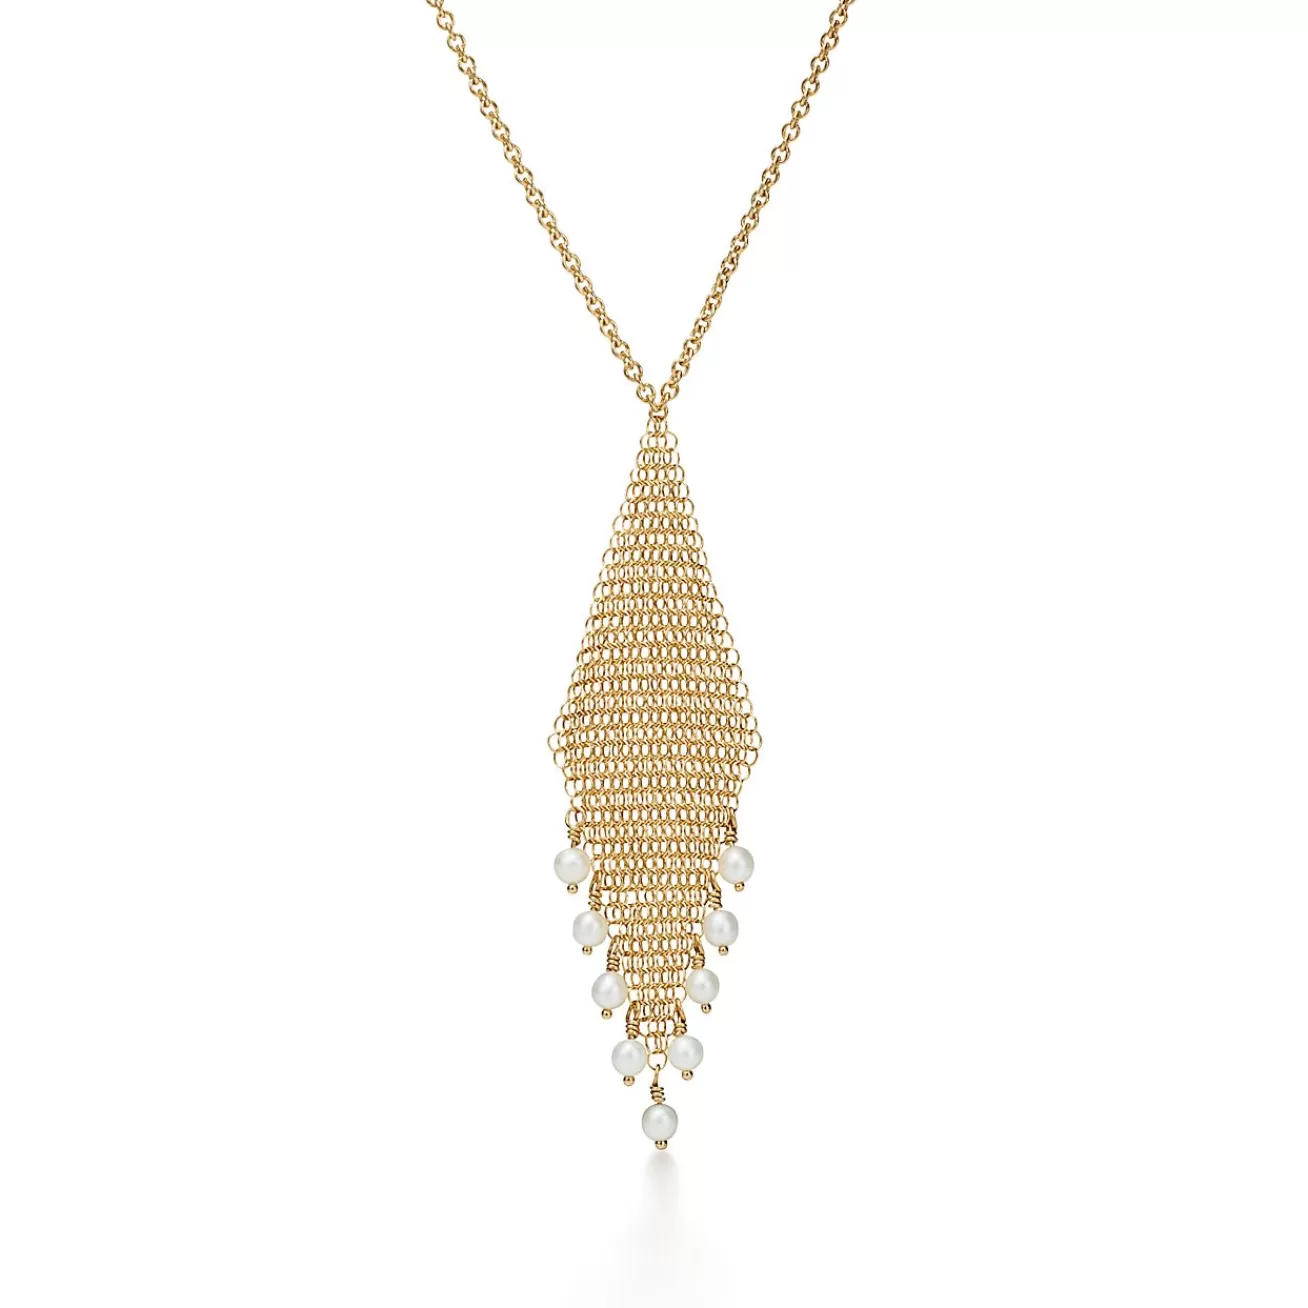 Tiffany & Co. Elsa Peretti® Mesh fringe pendant in 18k gold with freshwater pearls. | ^ Necklaces & Pendants | Gold Jewelry